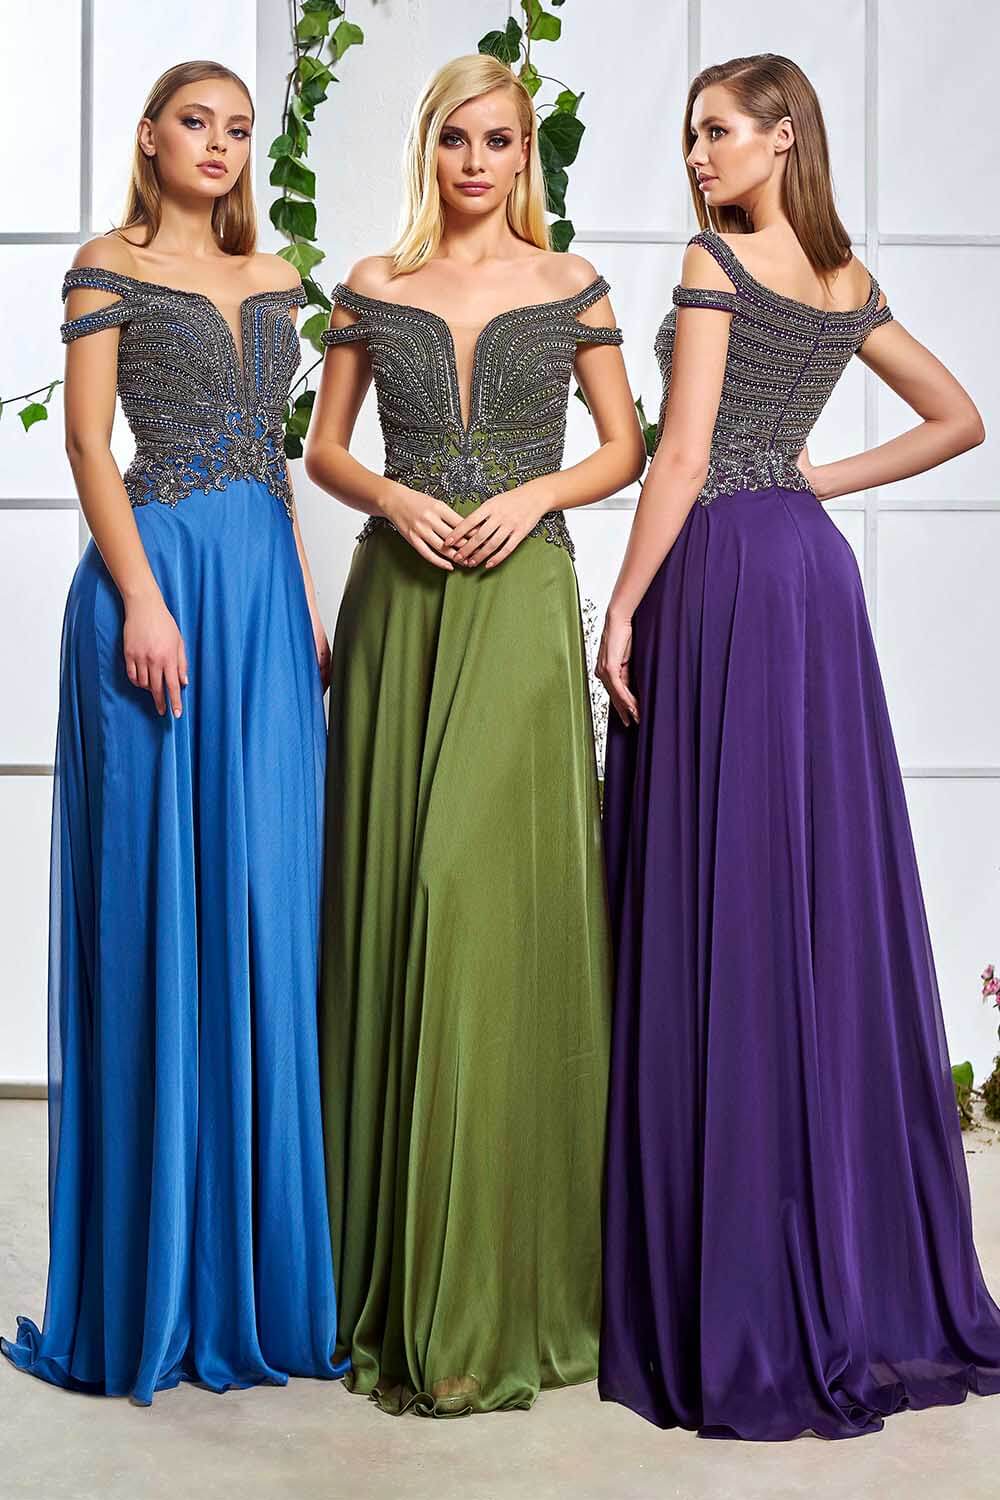 Stone Embroidered Off Shoulder Colorful Evening Dress